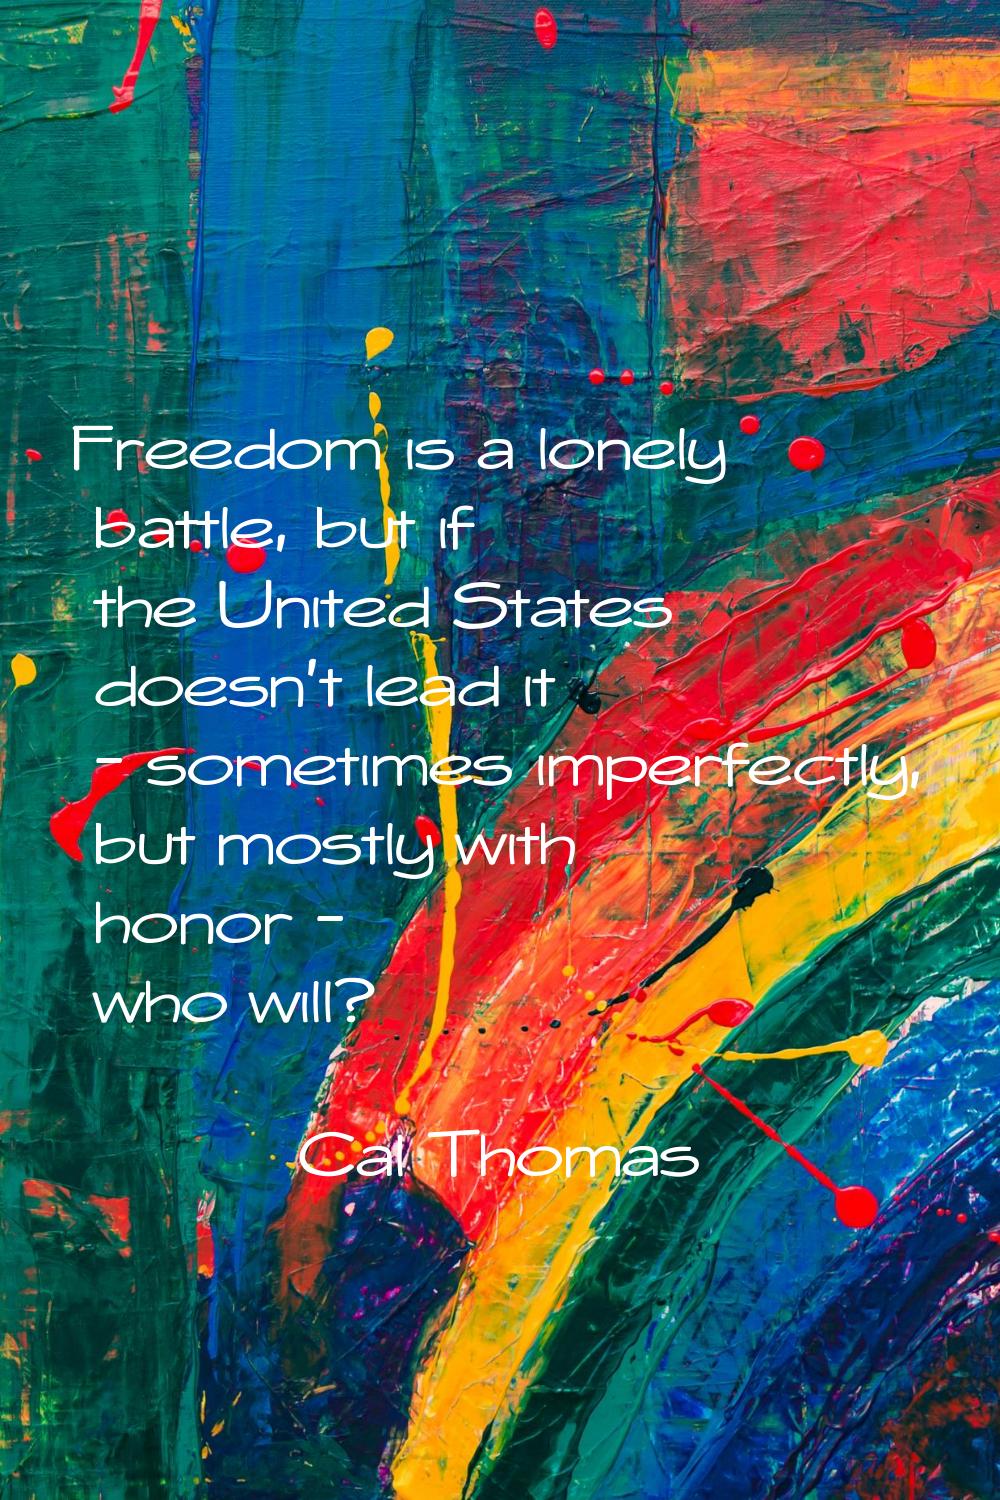 Freedom is a lonely battle, but if the United States doesn't lead it - sometimes imperfectly, but m